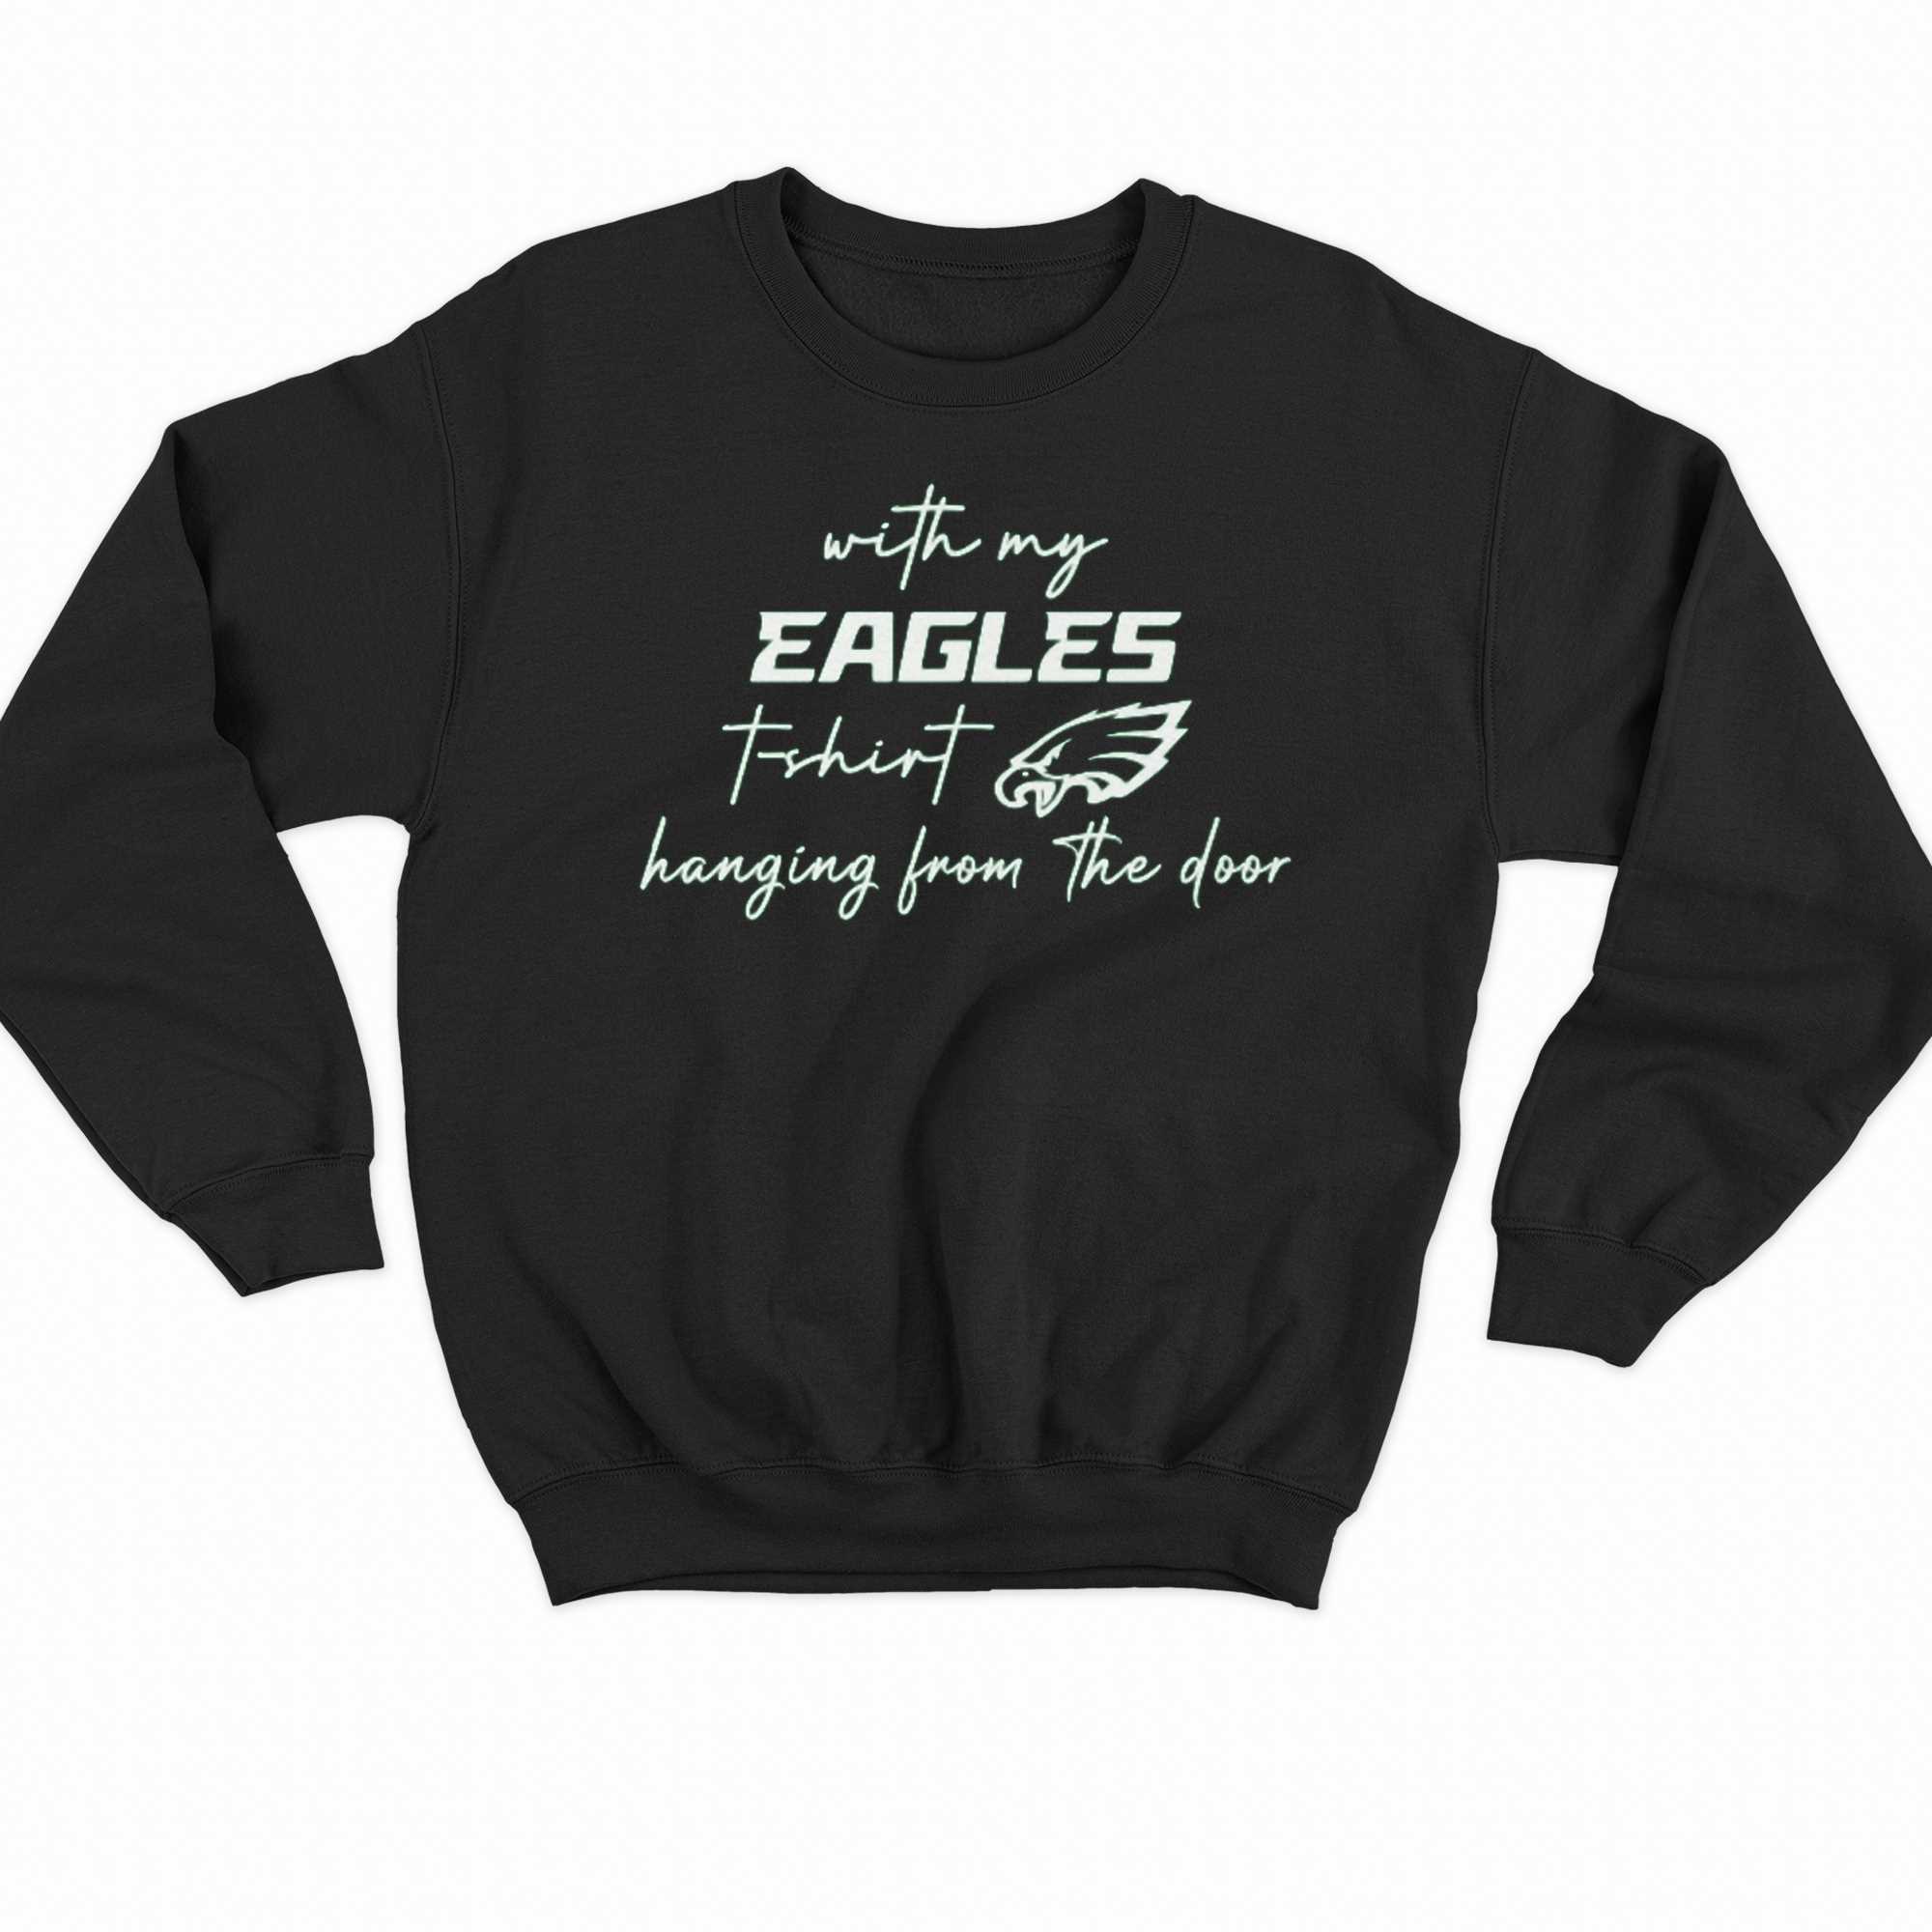 Taylor Swift Eagles With My Eagles T-shirt Hanging From The Door T Shirt 